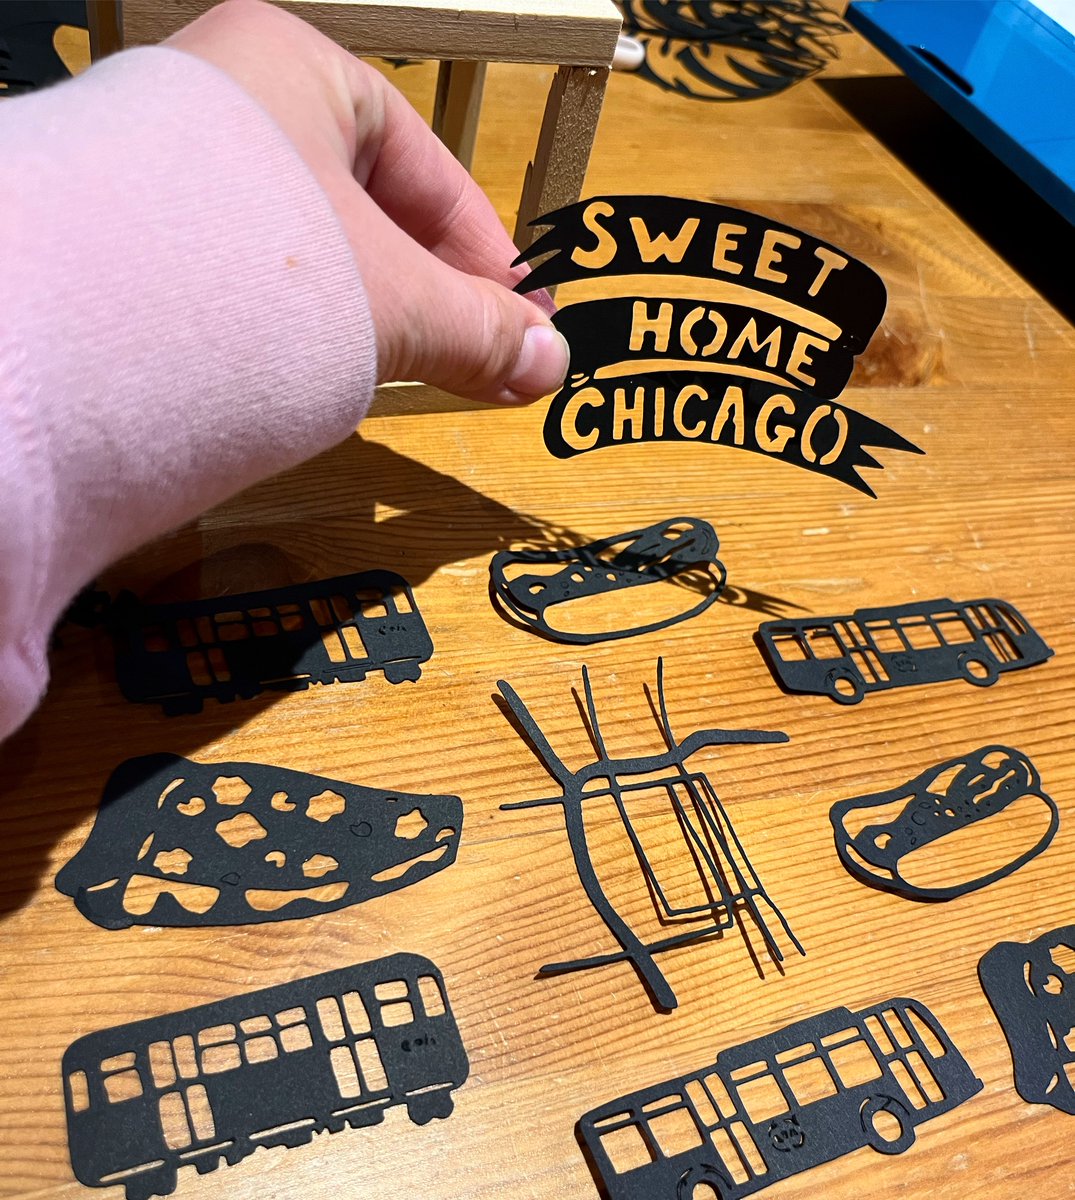 It’s Cricut time. I’m cutting out tiny shapes to decorate new  lanterns (now in mini size, and with flameless candles, so you don’t need an outlet)! I’m all about cozy autumn, so I can’t wait to finish putting these together.
🌭
#chicagoartist #chicagoillustrator   #chicagohotdog